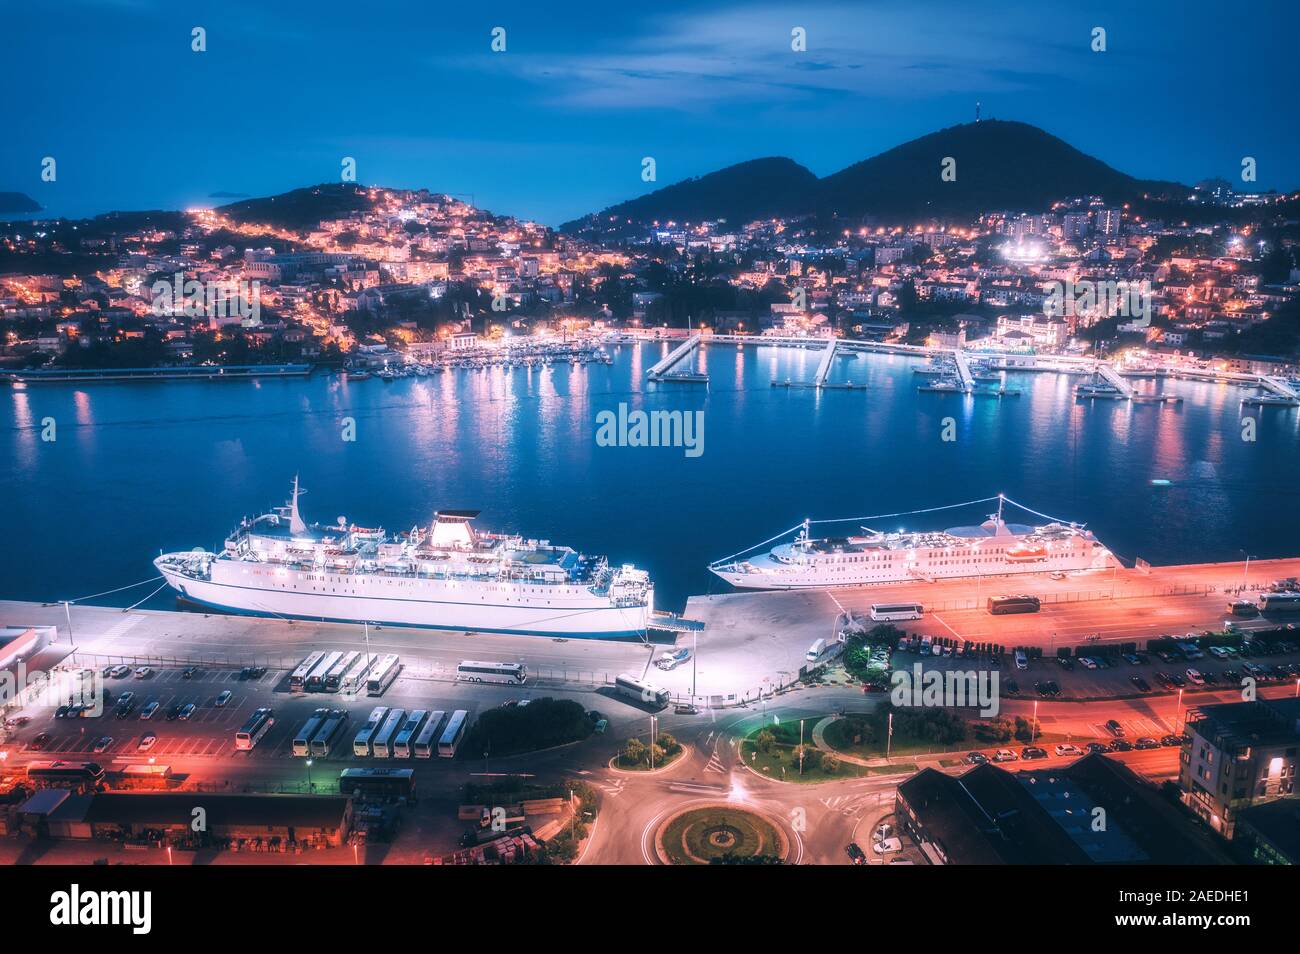 Aerial view of cruise ship in port at night. Landscape Stock Photo